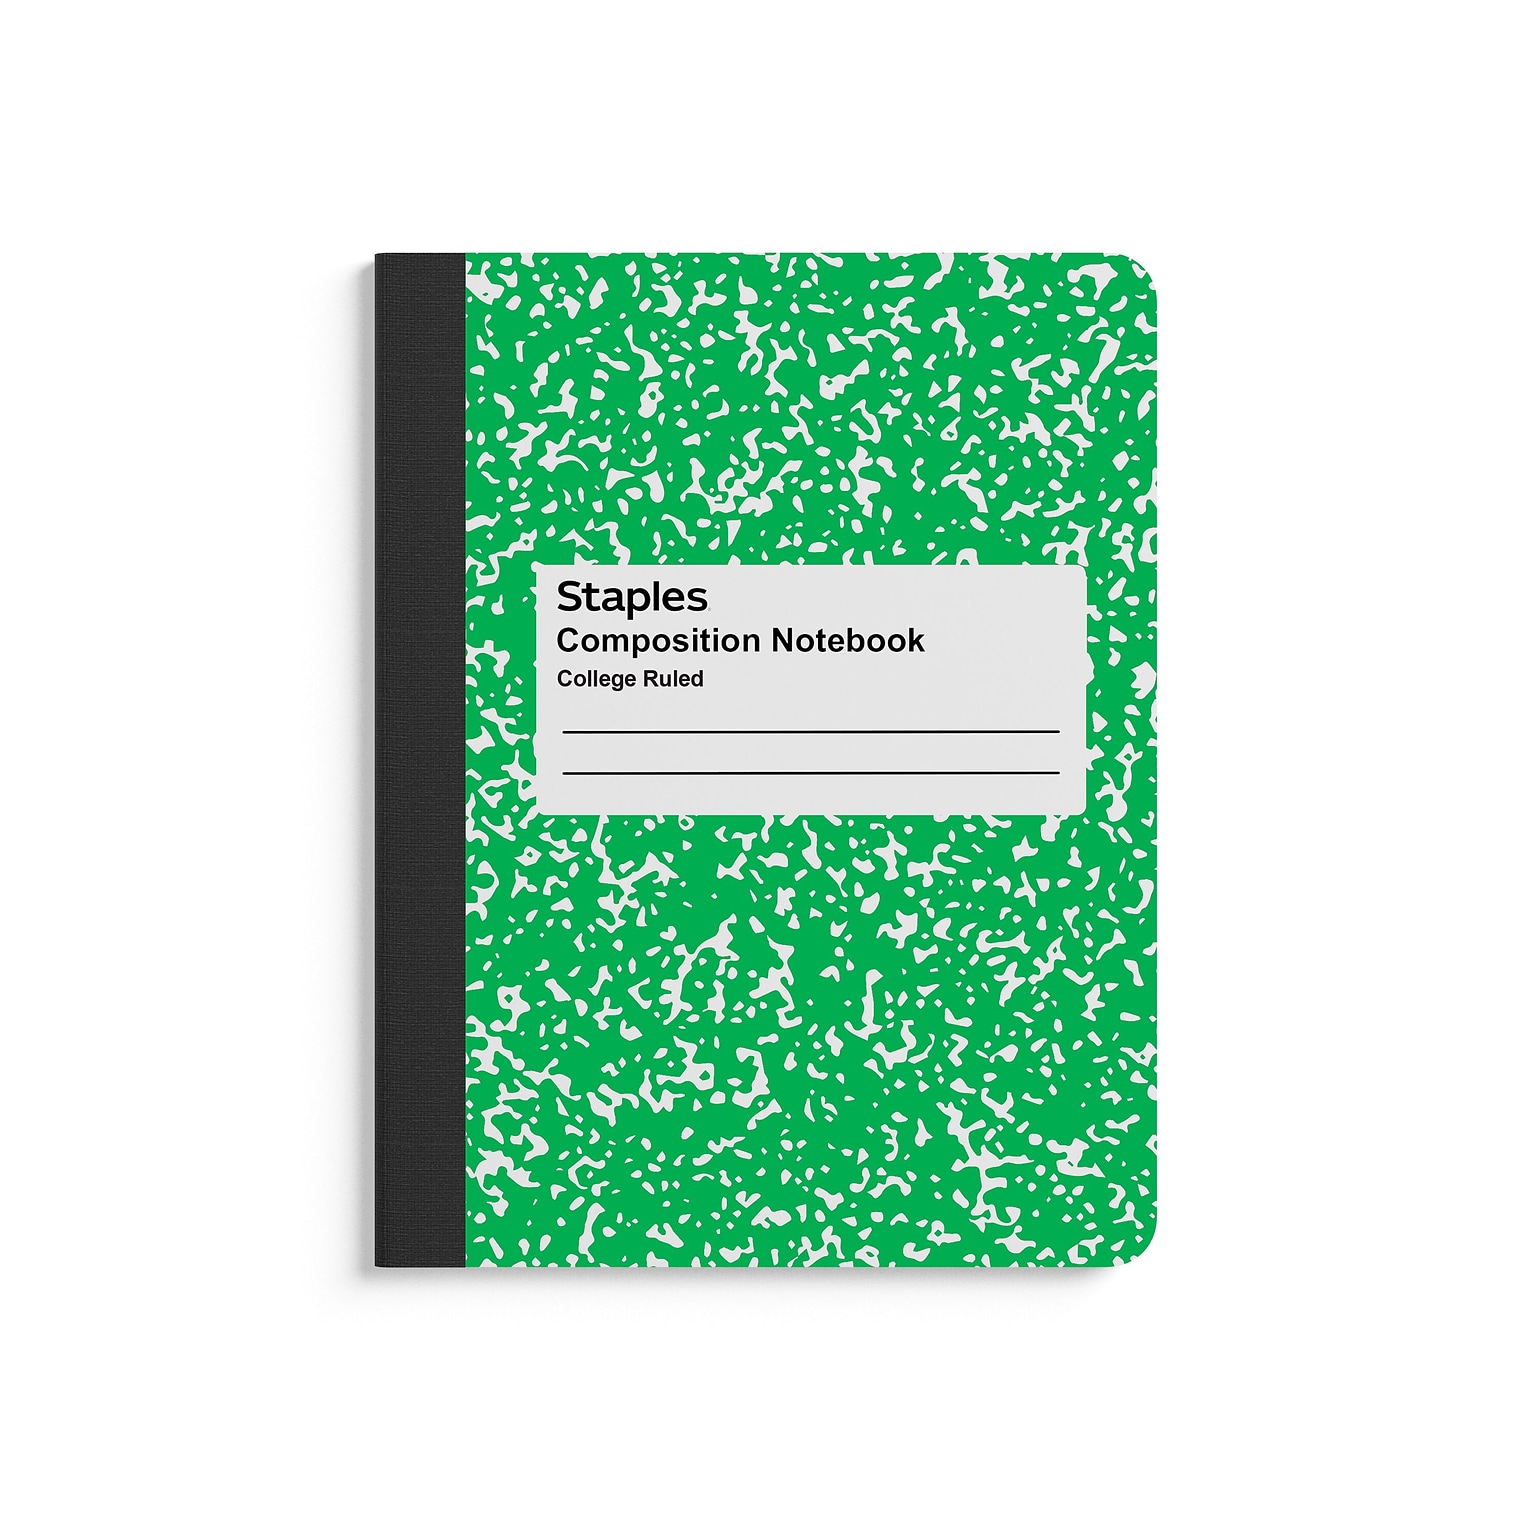 Staples® Composition Notebook, 7.5 x 9.75, College Ruled, 100 Sheets, Green (ST55066)